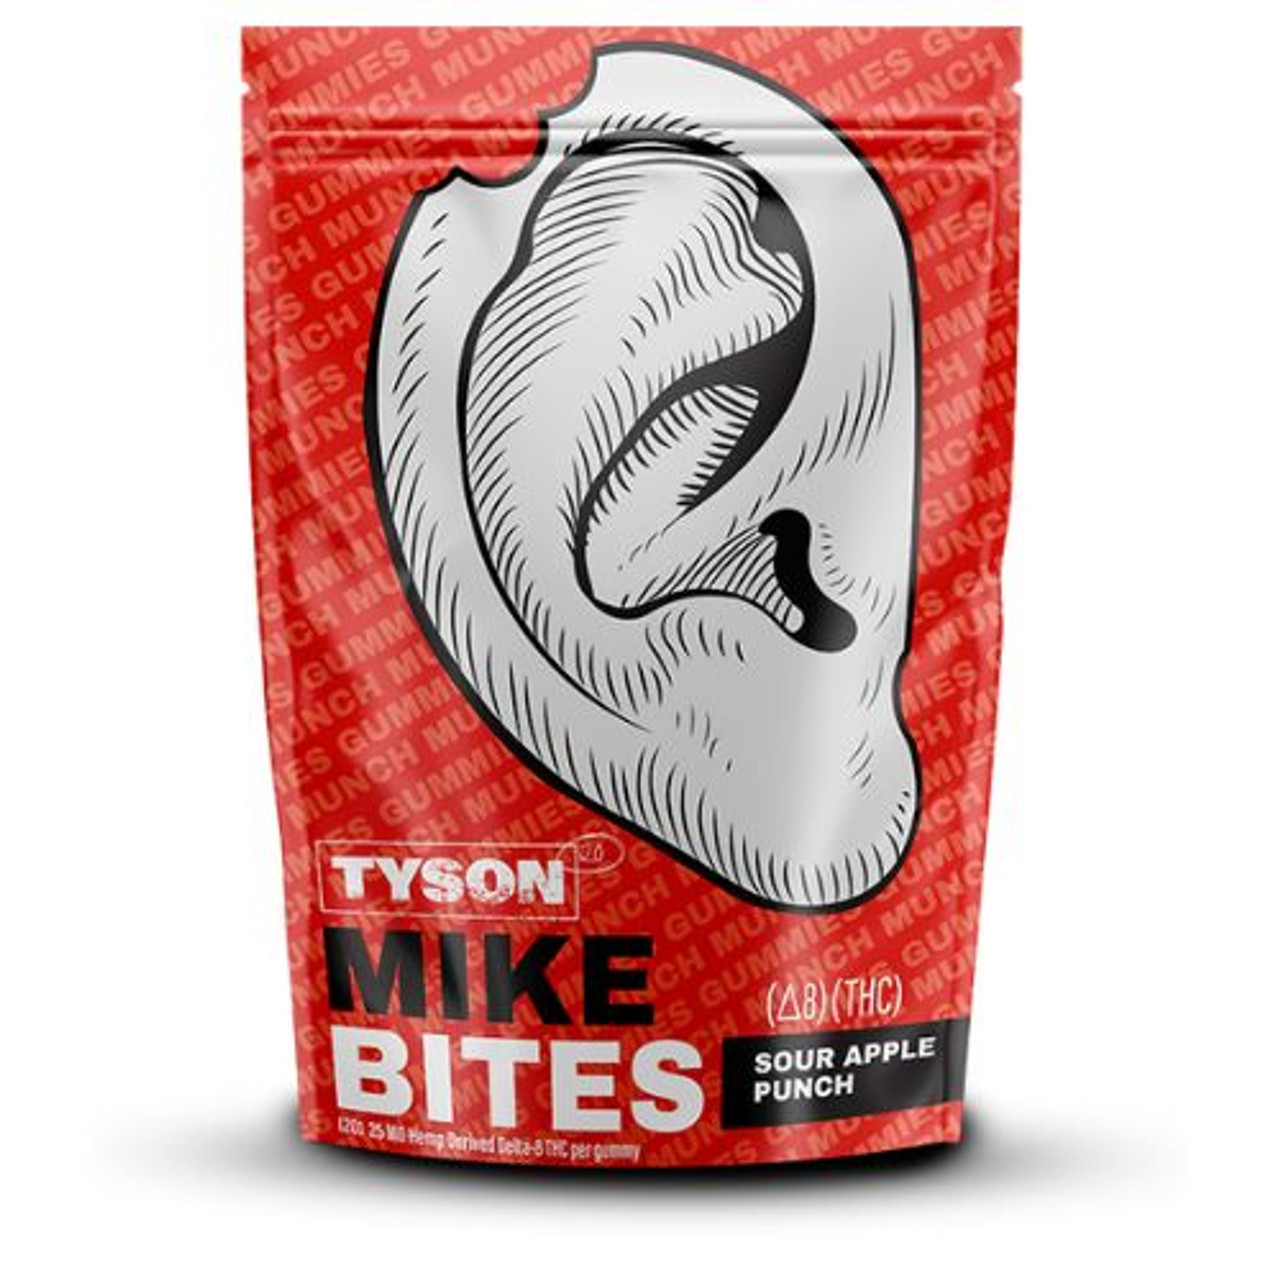 Tyson 2.0 Mike Bites 500mg D-8 Gummies - Sour Apple Punch - 10 ct. Display